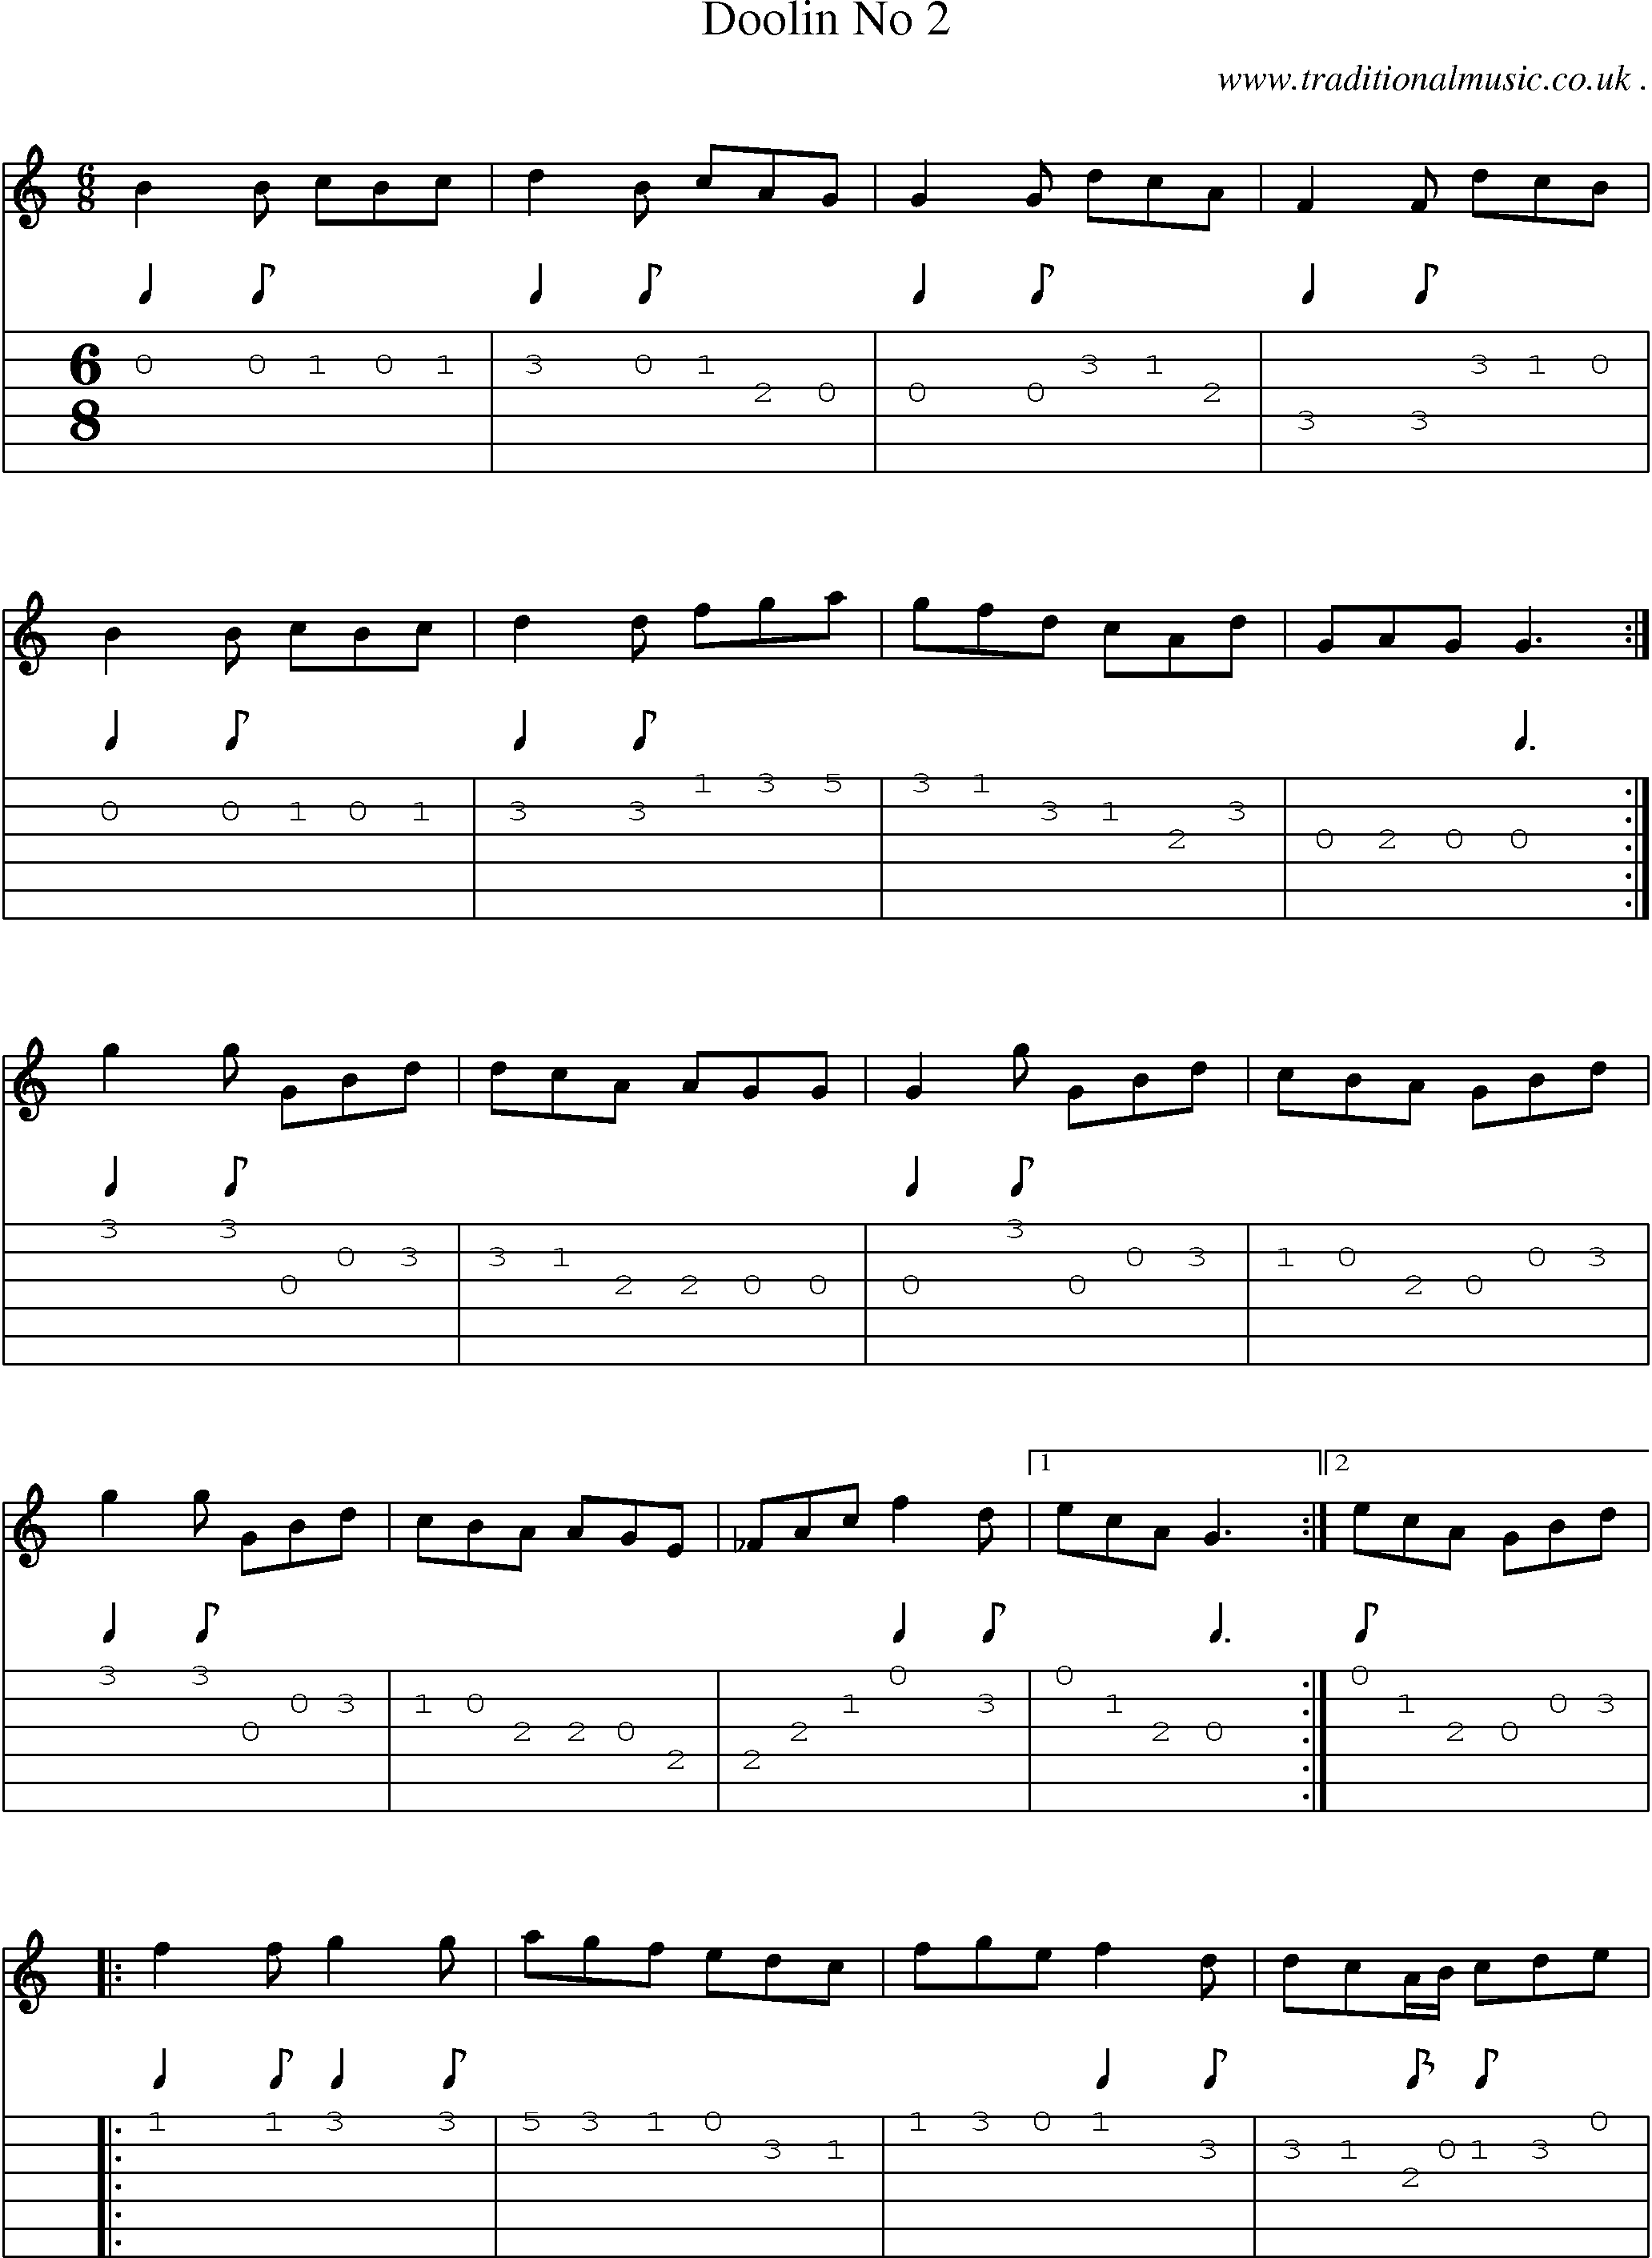 Sheet-Music and Guitar Tabs for Doolin No 2